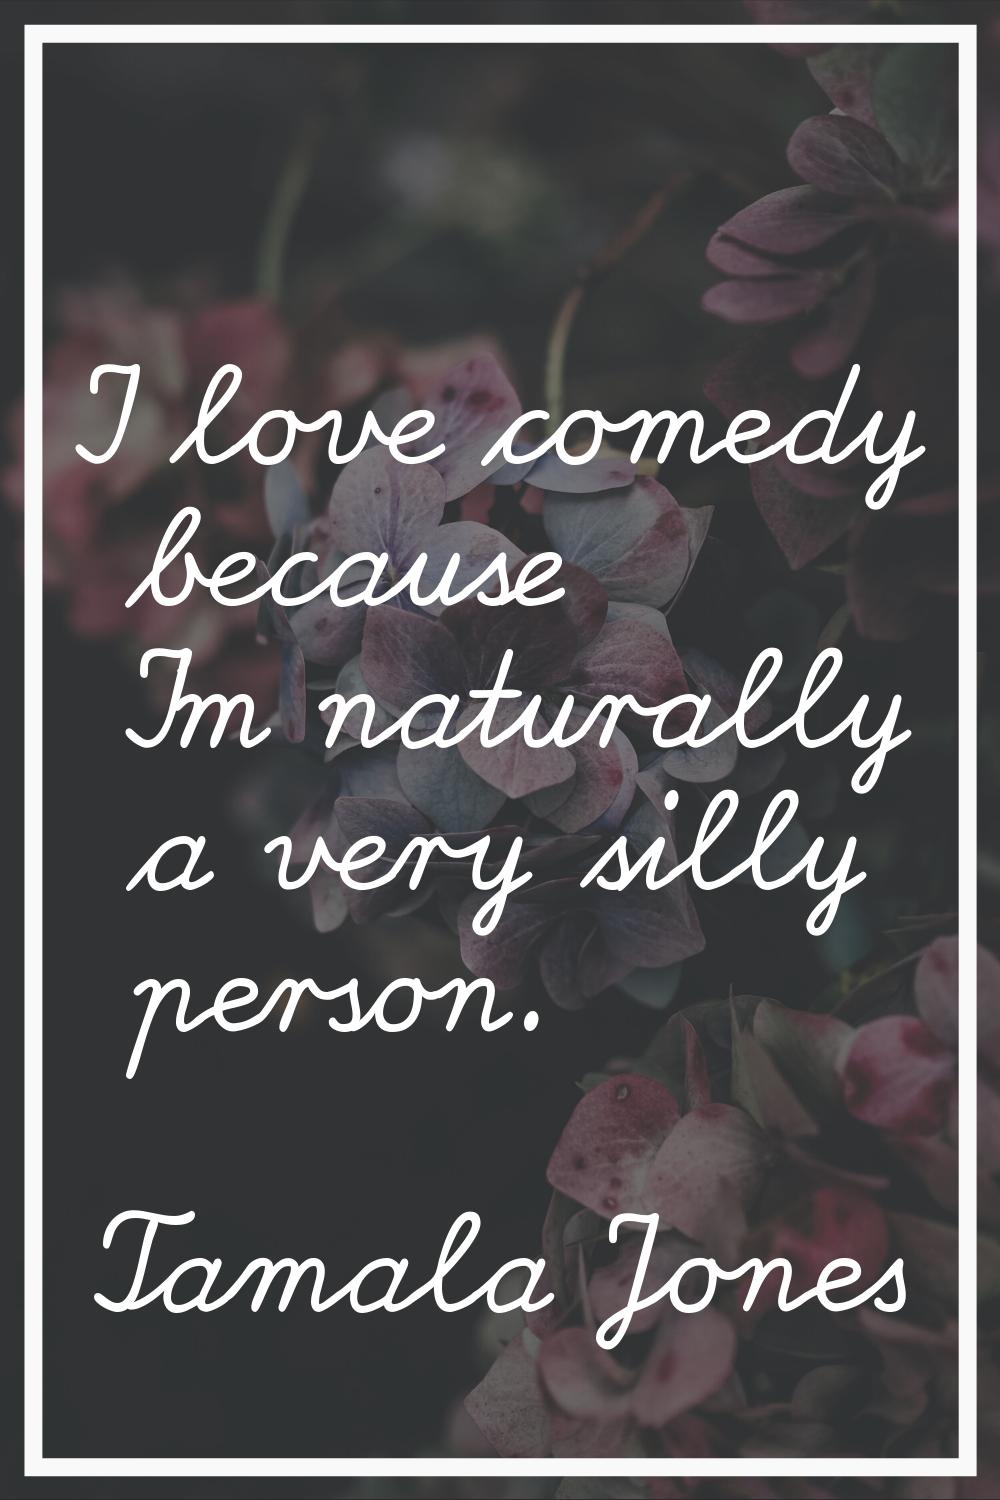 I love comedy because I'm naturally a very silly person.